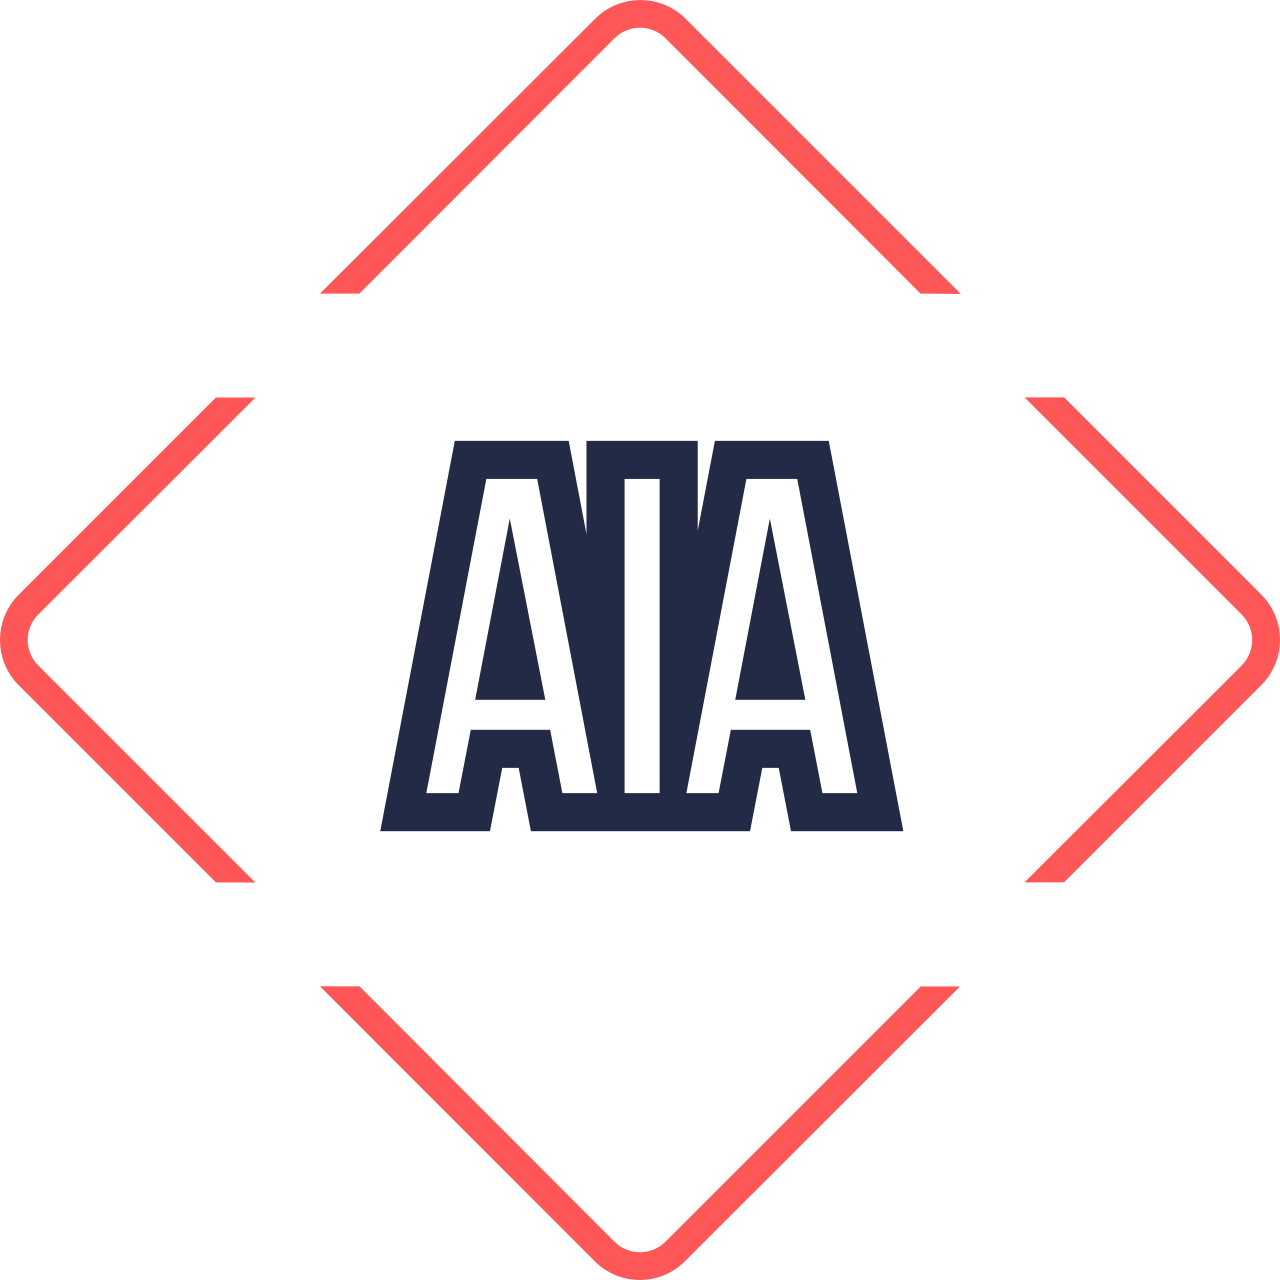 AIA's web page